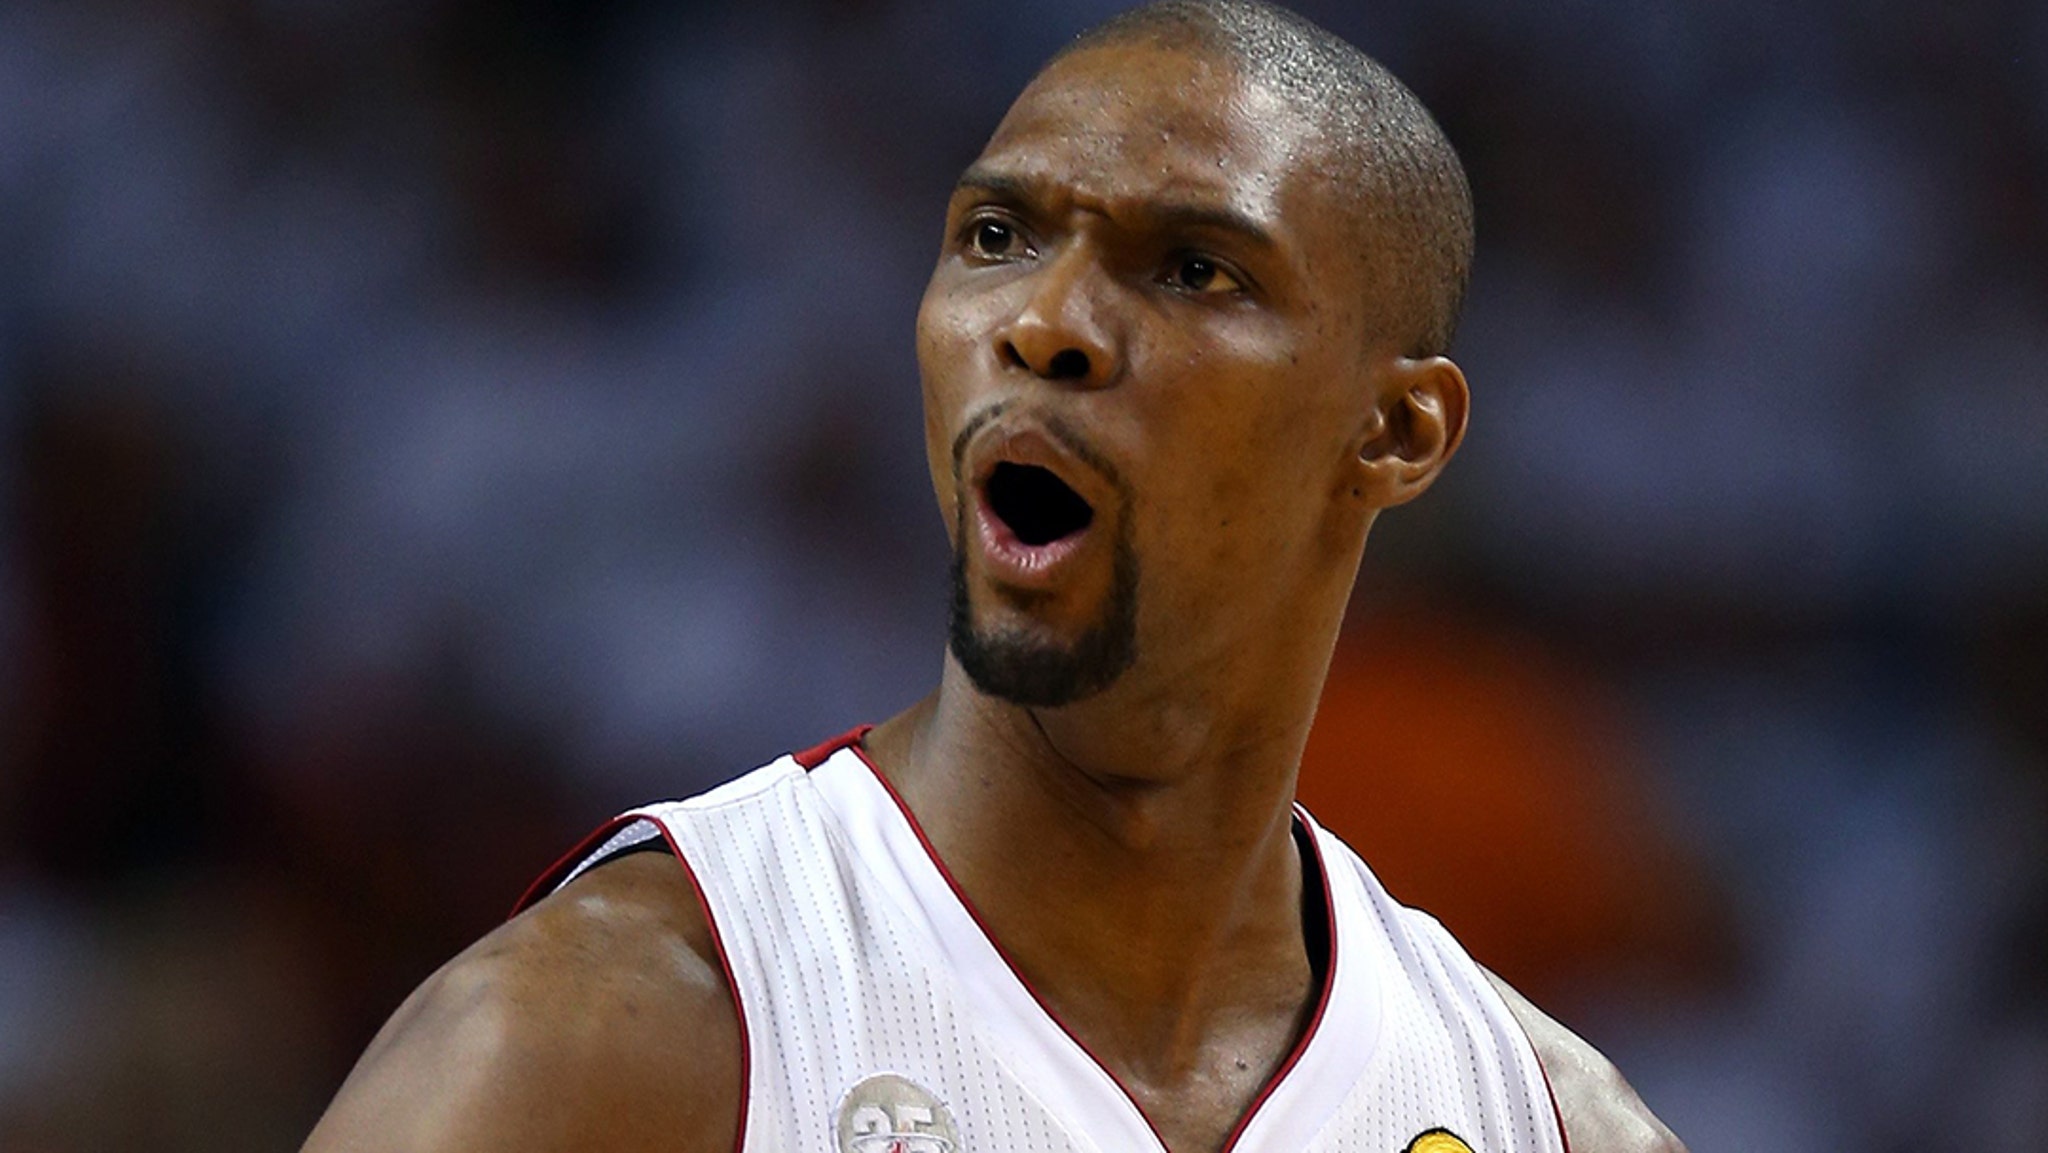 From James Harden to Chris Bosh, the best facial expressions of NBA players